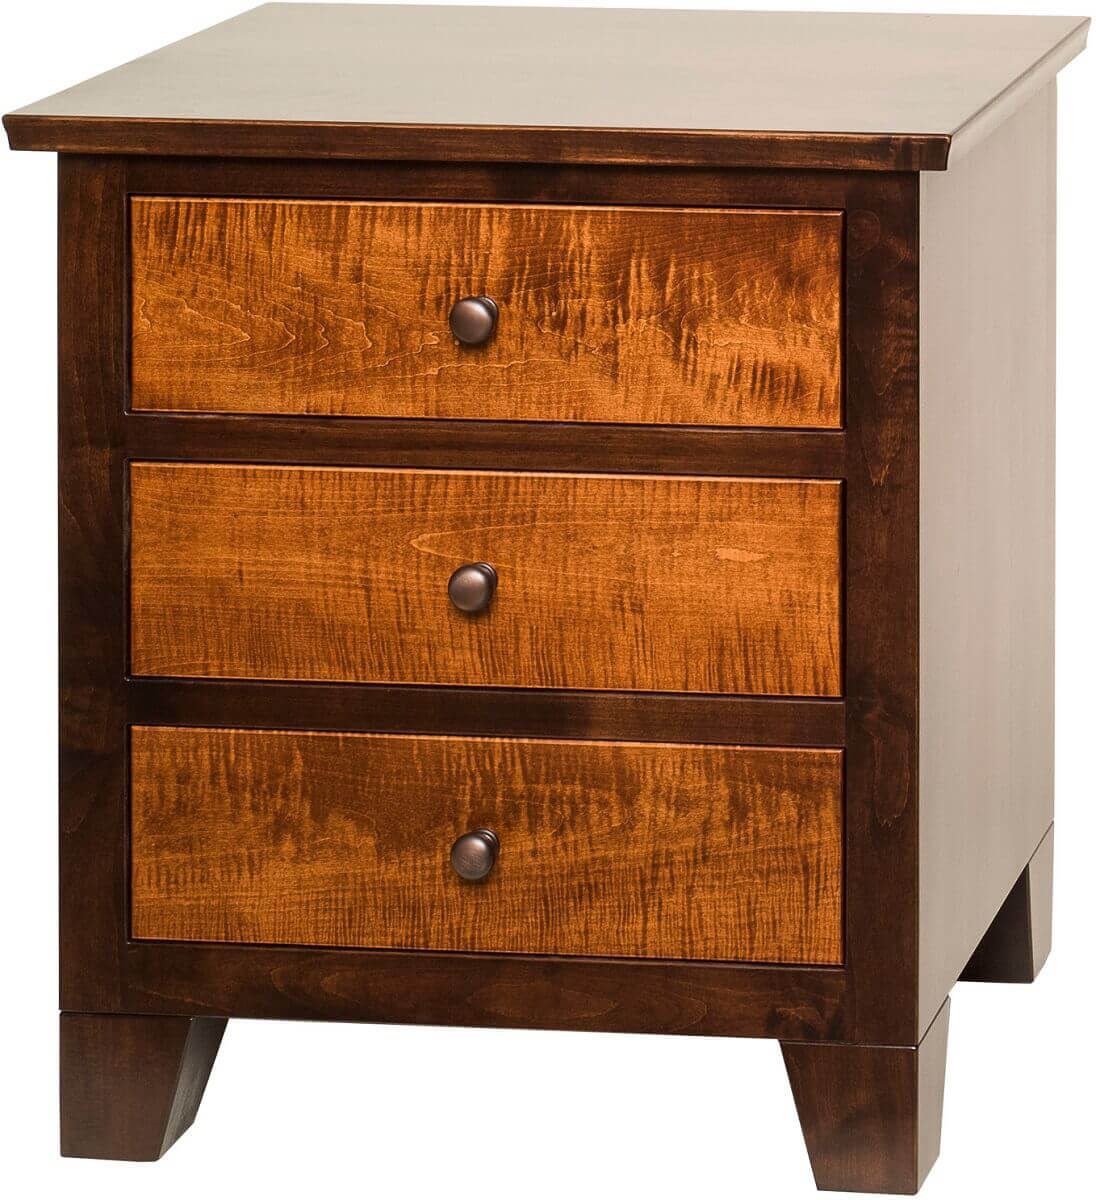 Shown with Tiger Maple Drawer Fronts